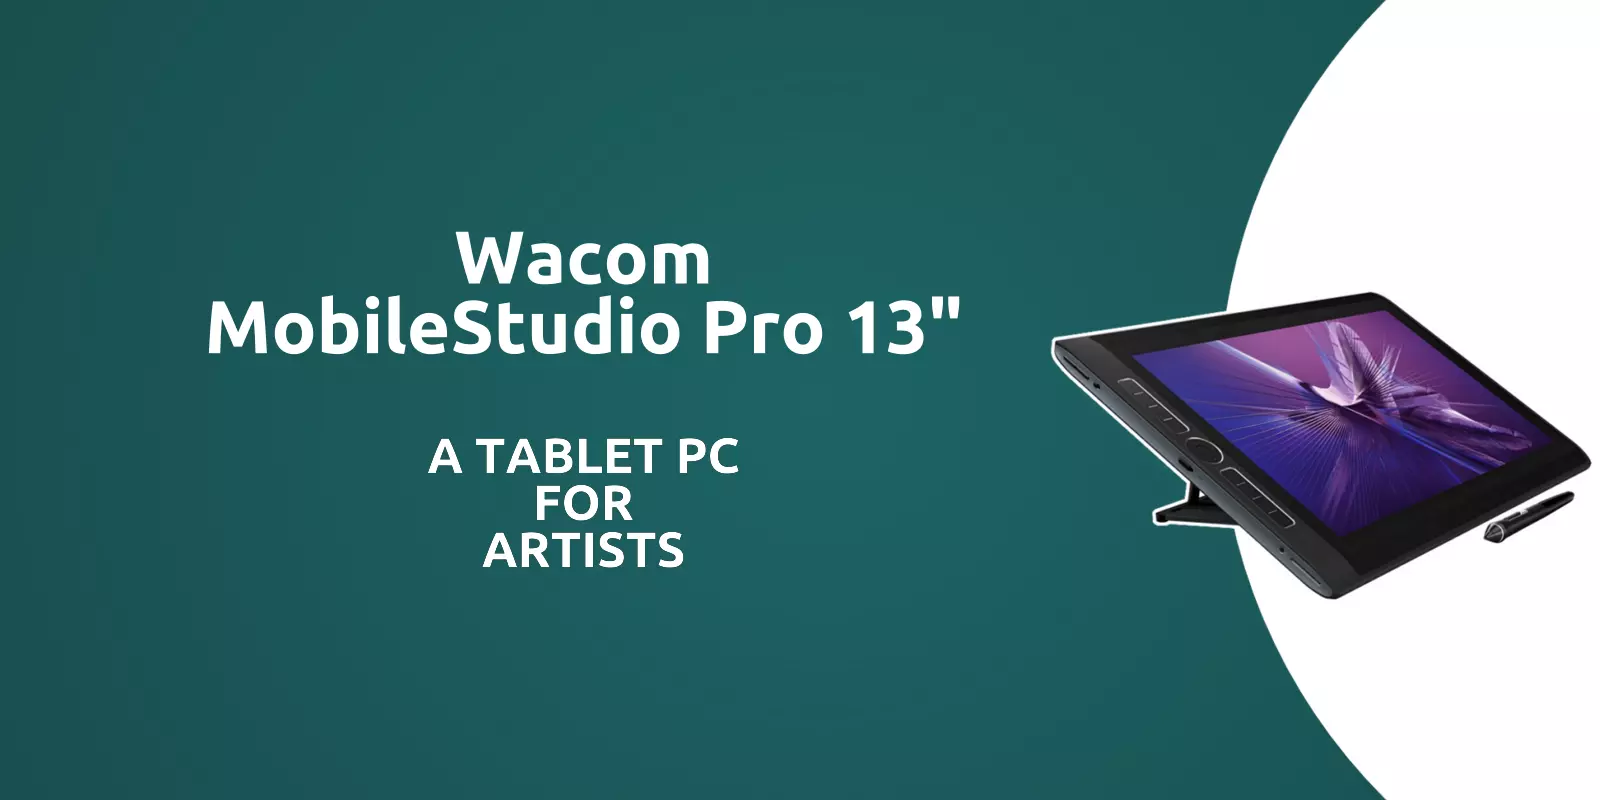 Wacom MobileStudio Pro 13-inch: A tablet PC for Artists